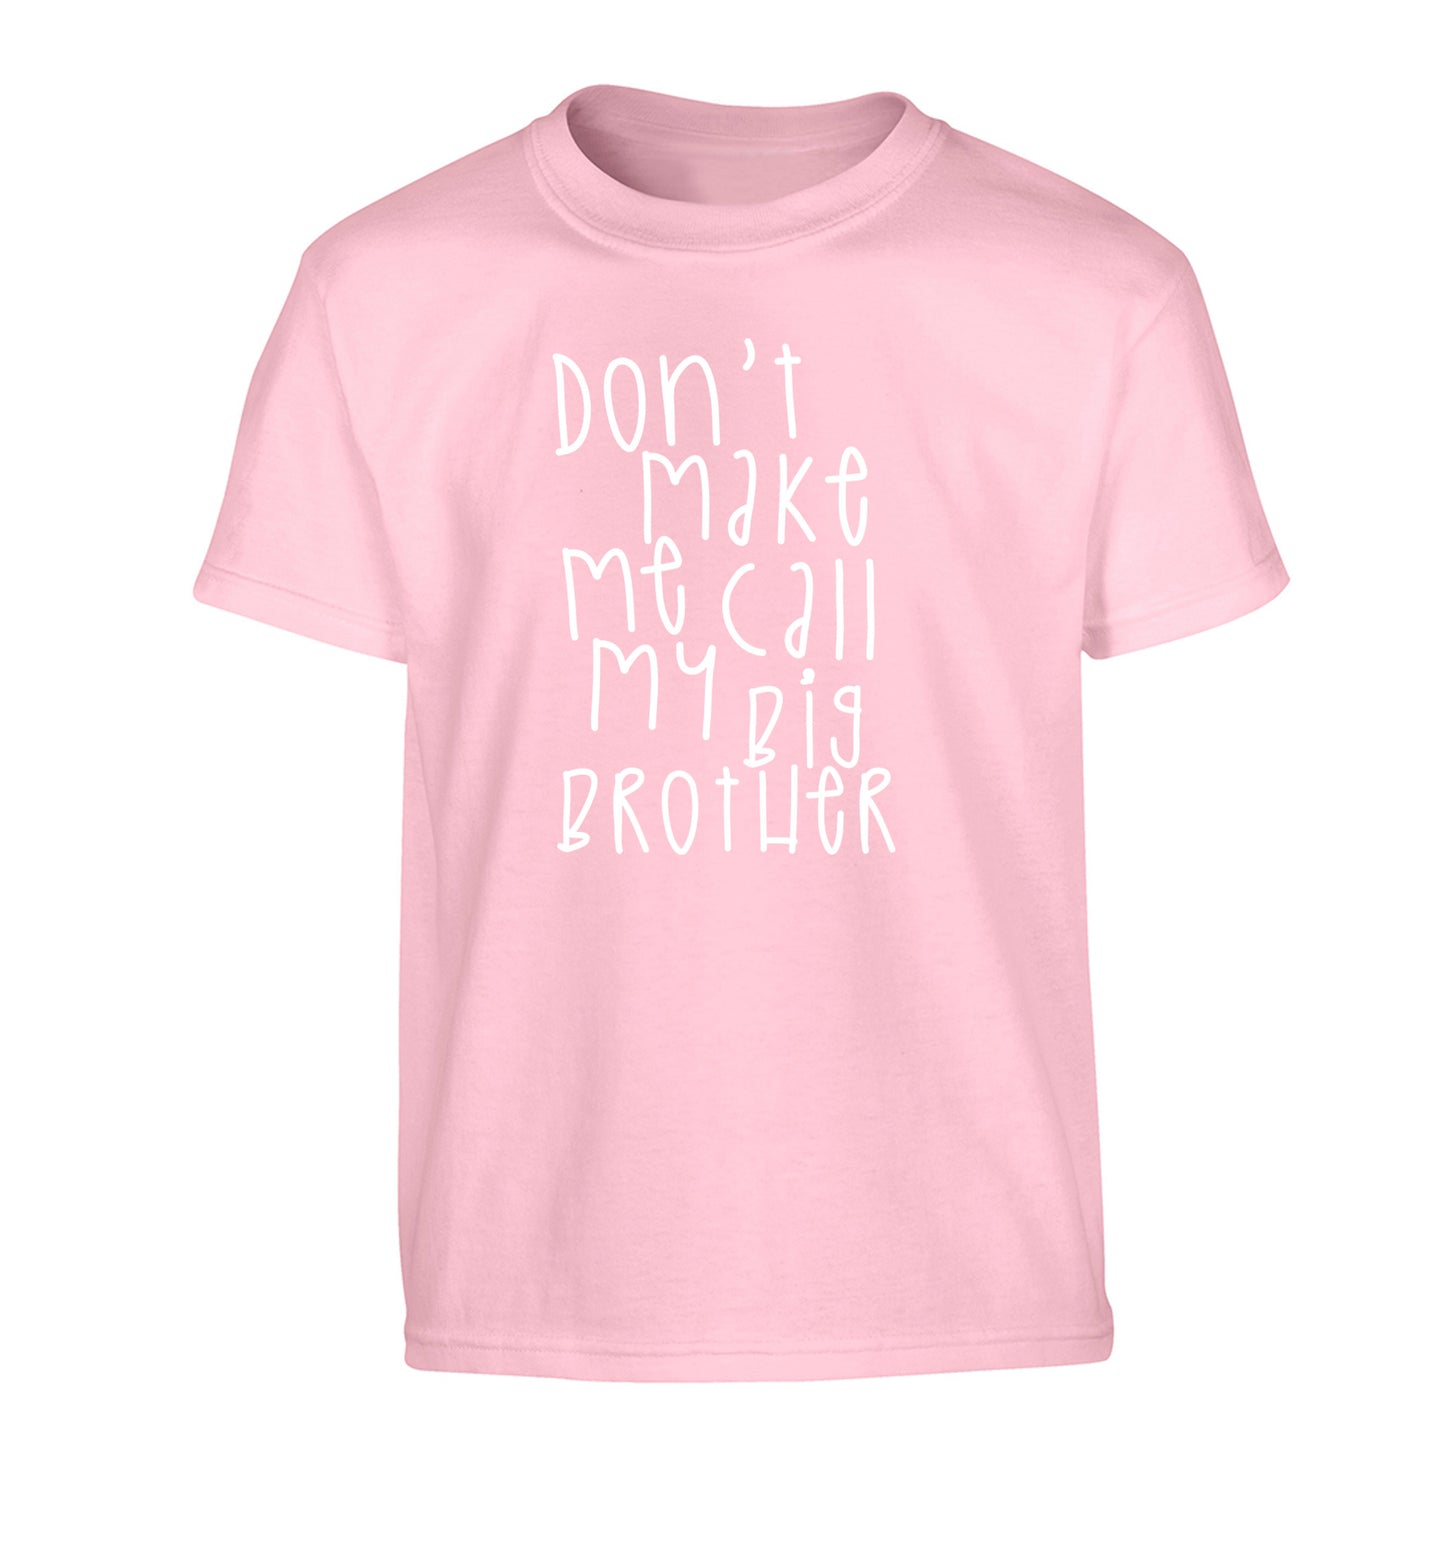 Don't make me call my big brother Children's light pink Tshirt 12-14 Years